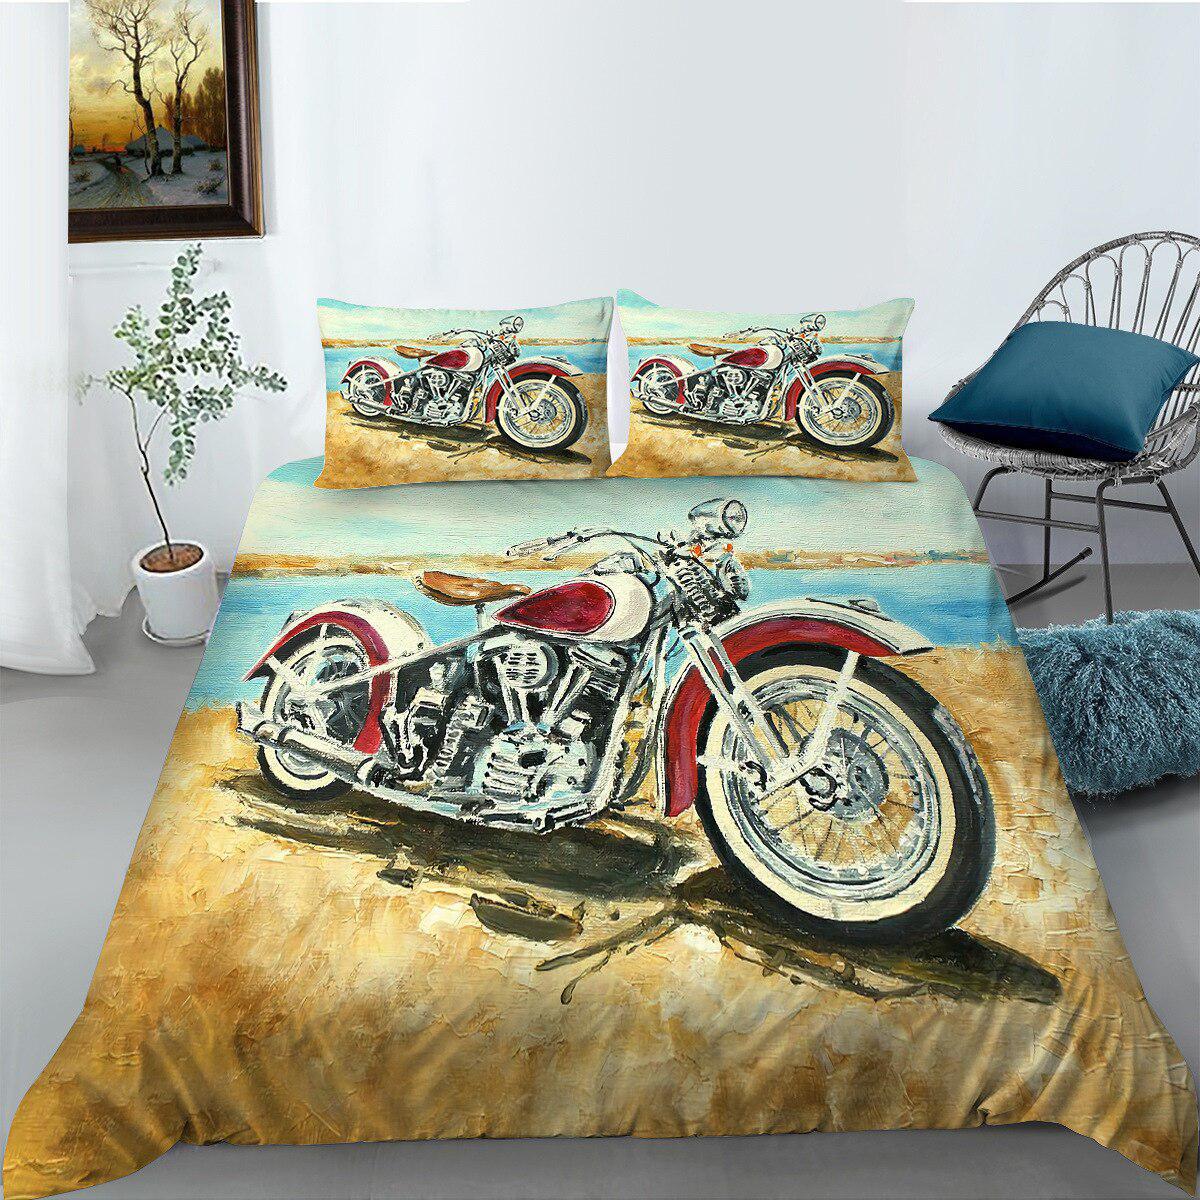 Old motorcycle duvet cover